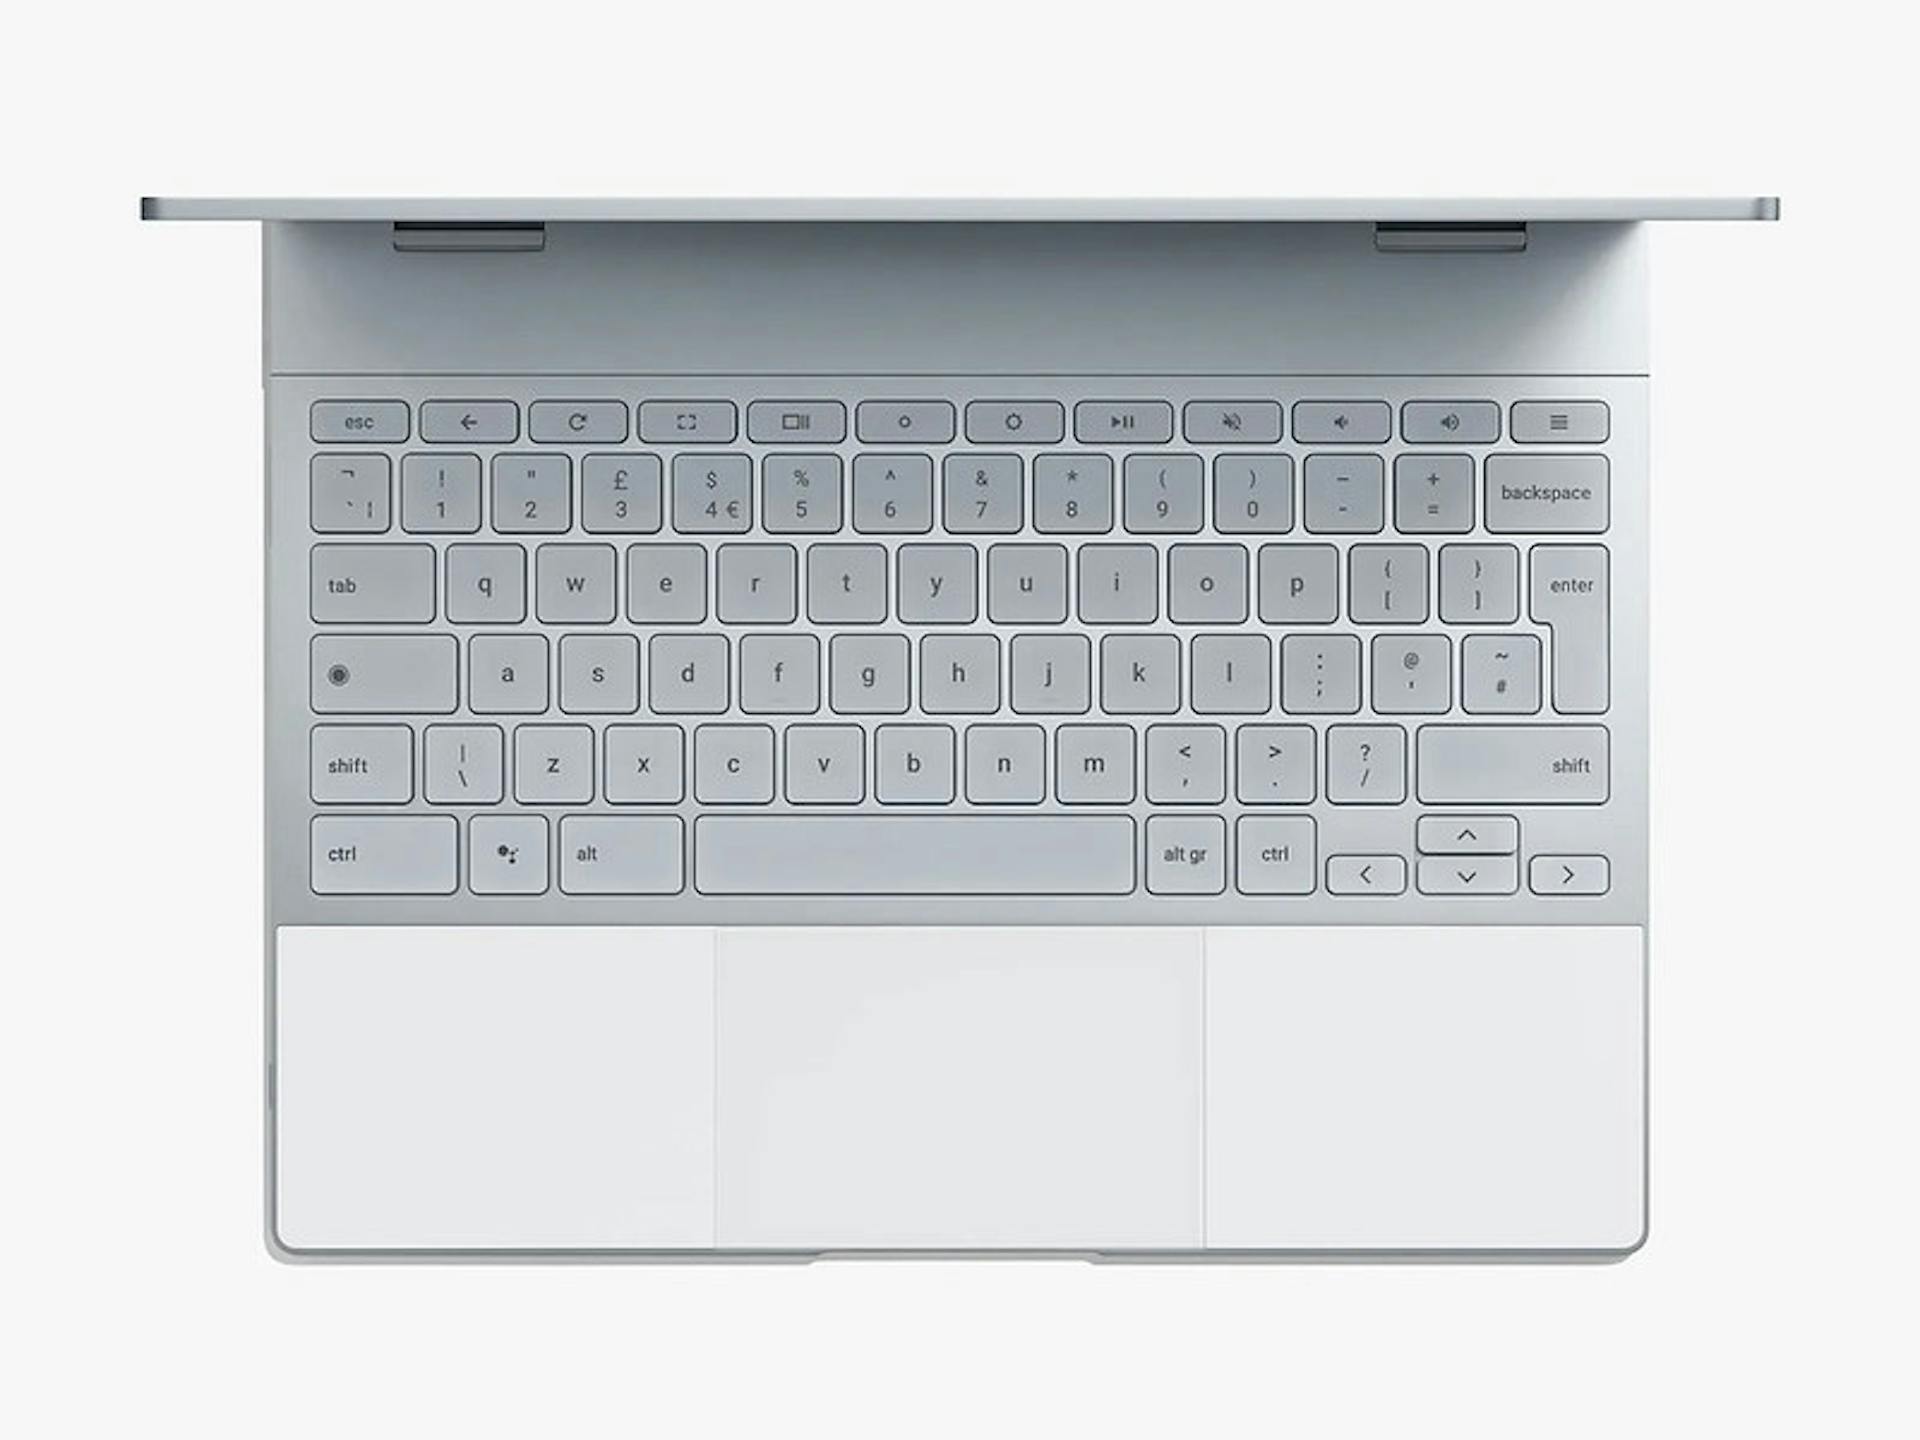 The Pixelbook has a backlit keyboard with a dedicated Google Assistant button. Image credit: Google